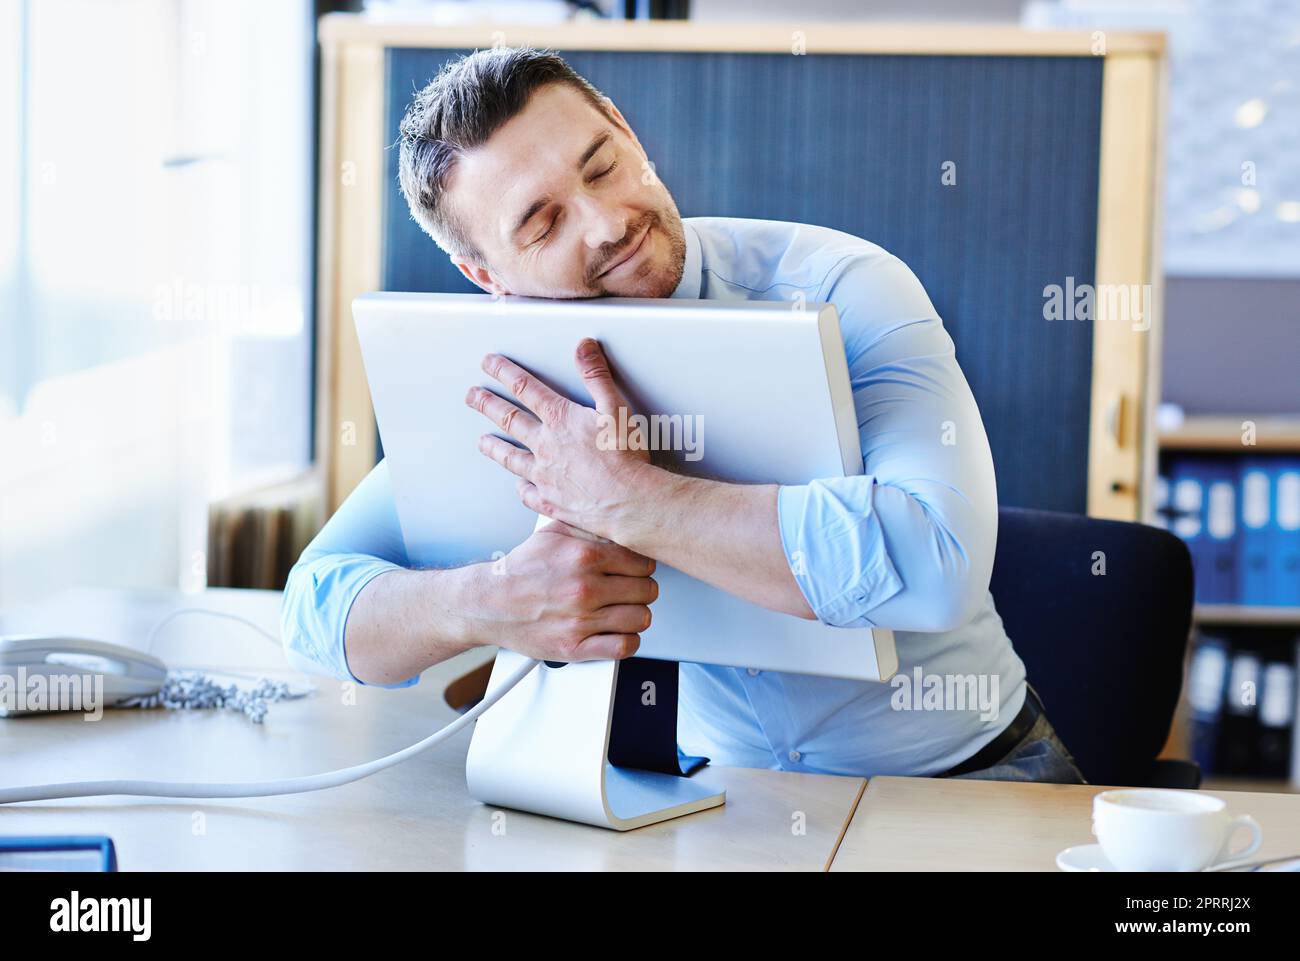 Its a businessmans best friend. a businessman hugging his monitor warmly. Stock Photo